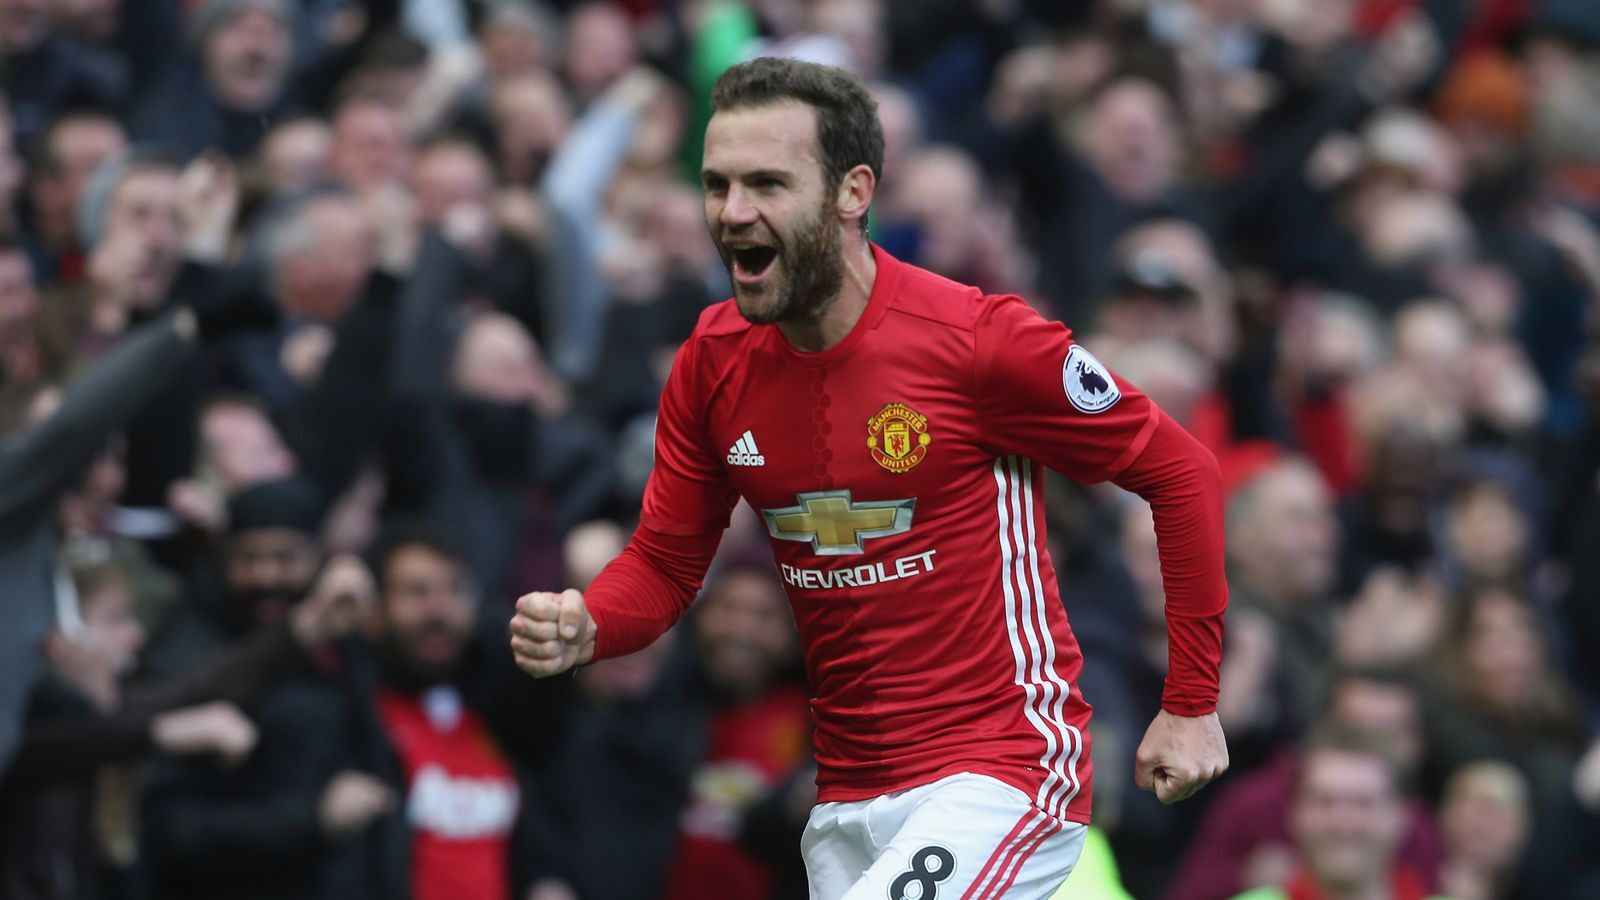 Juan Mata Finds It Surreal to Play for Manchester United